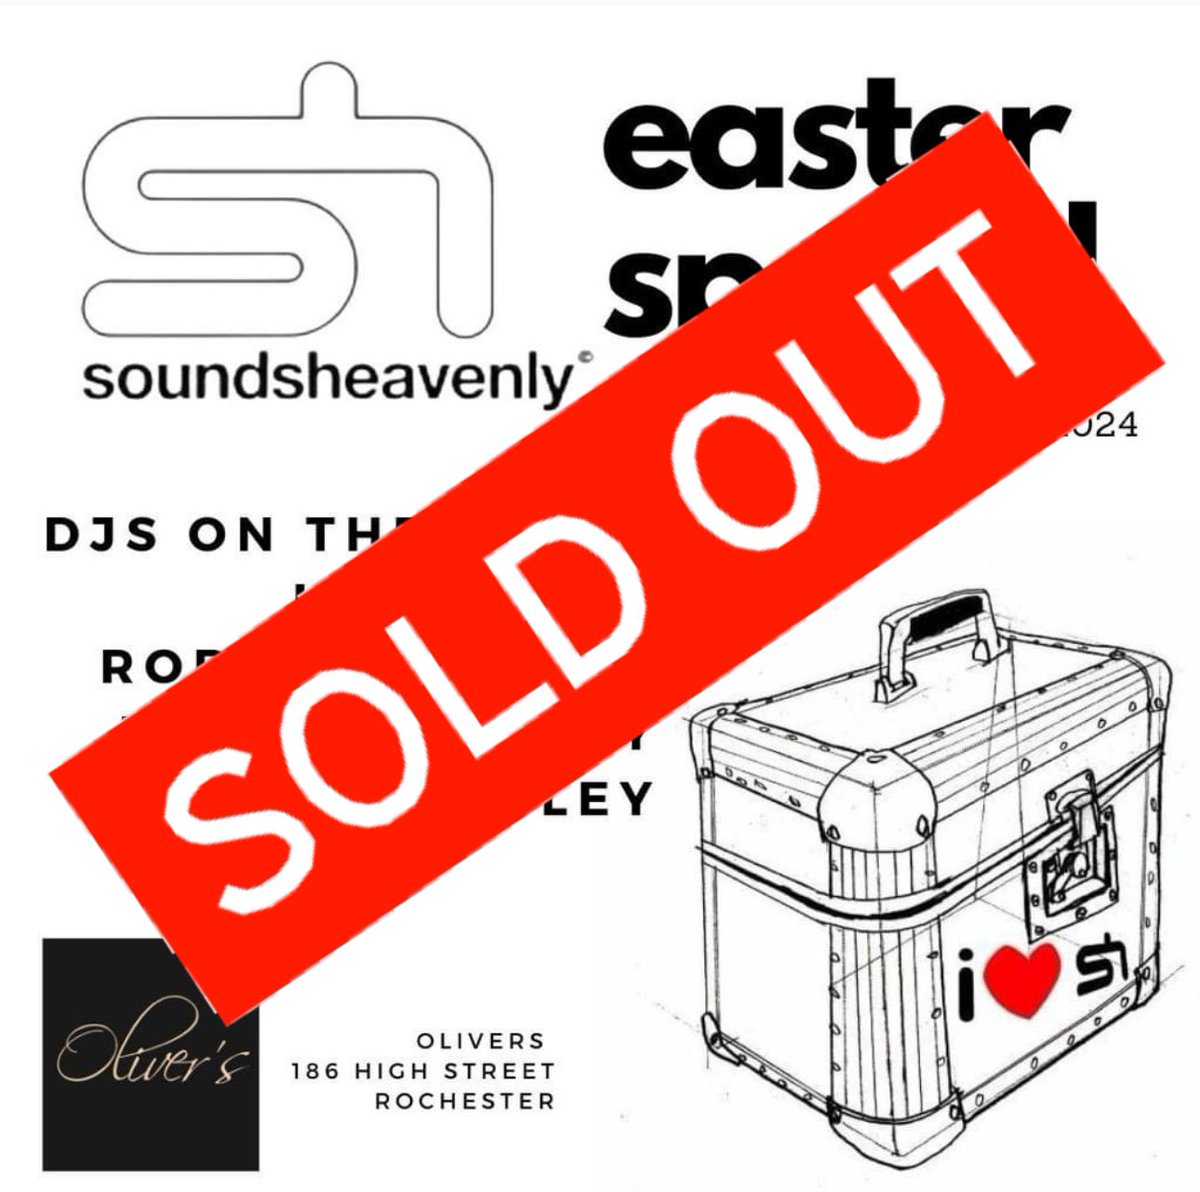 Really looking forward to spinning some house music at Oliver's Bar & Club, Rochester on the bank holiday Sunday 31st March for the SOLD OUT Sounds Heavenly Reunion Party 🎧🏠🎶🎵